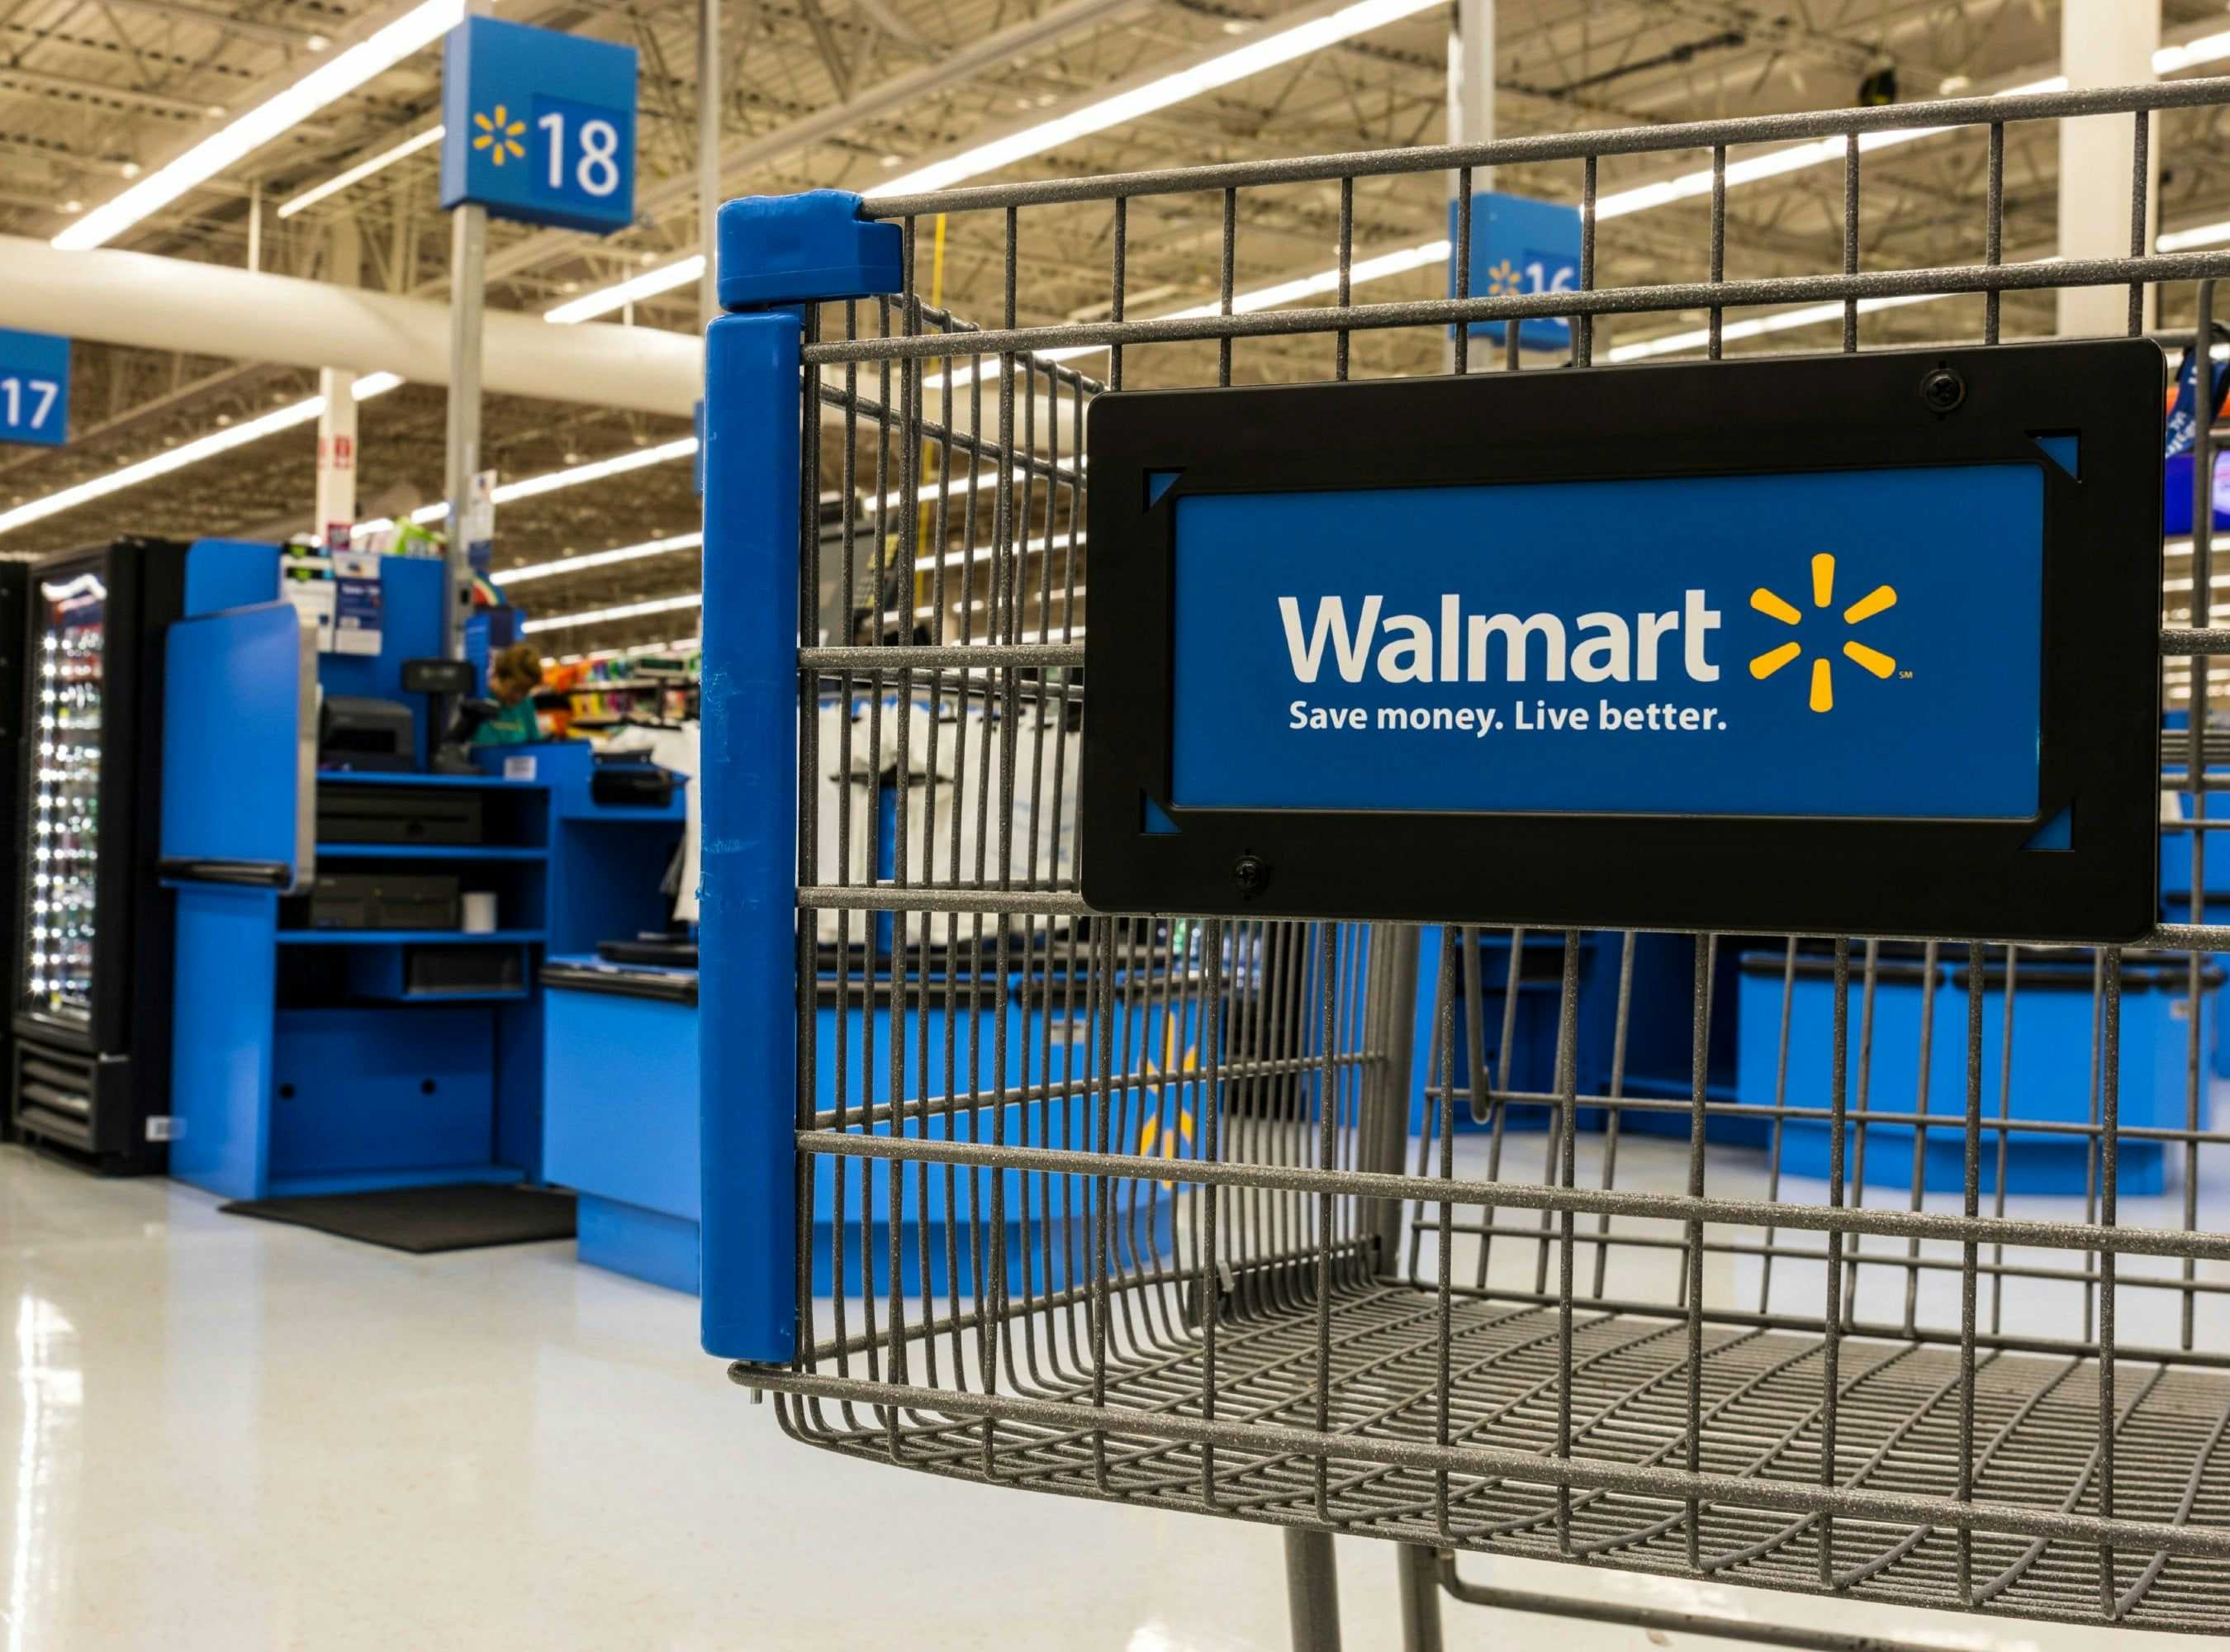 Walmart Faces Wrongful Death Suit After Employee Dies from COVID-19